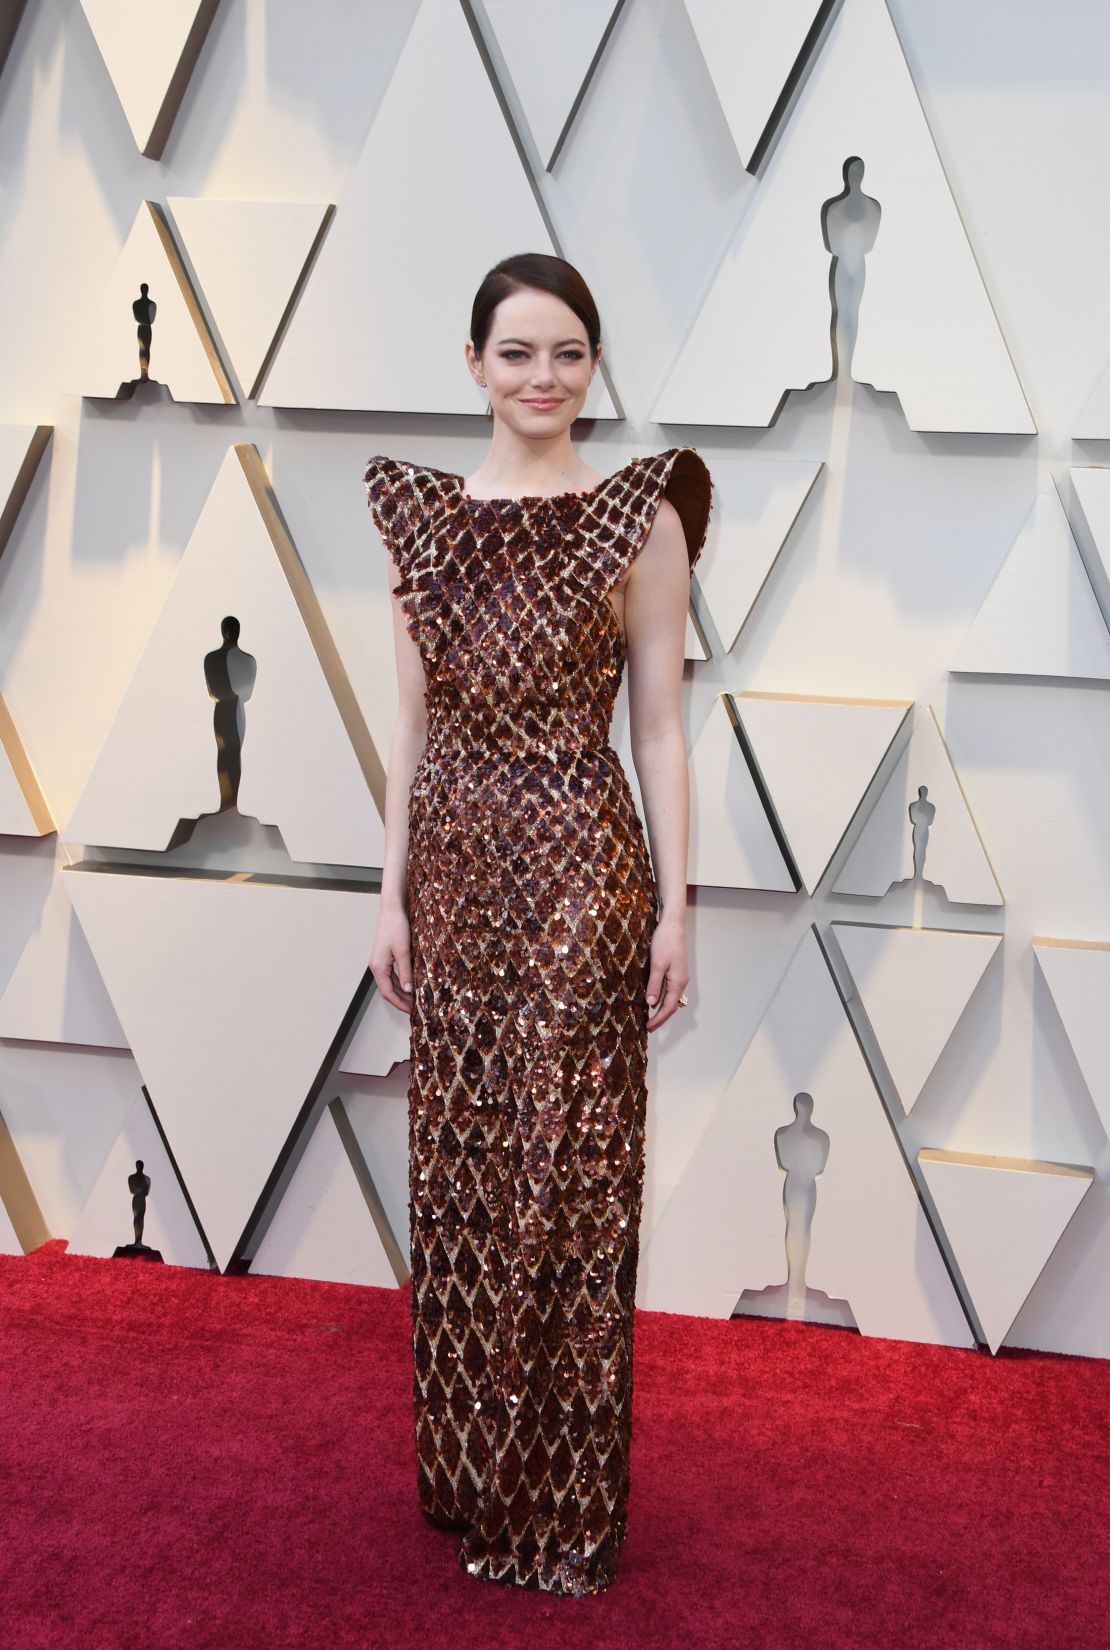 Best Supporting Actress nominee for "The Favourite" Emma Stone arrives for the 91st Annual Academy Awards at the Dolby Theatre in Hollywood, California on February 24, 2019. 